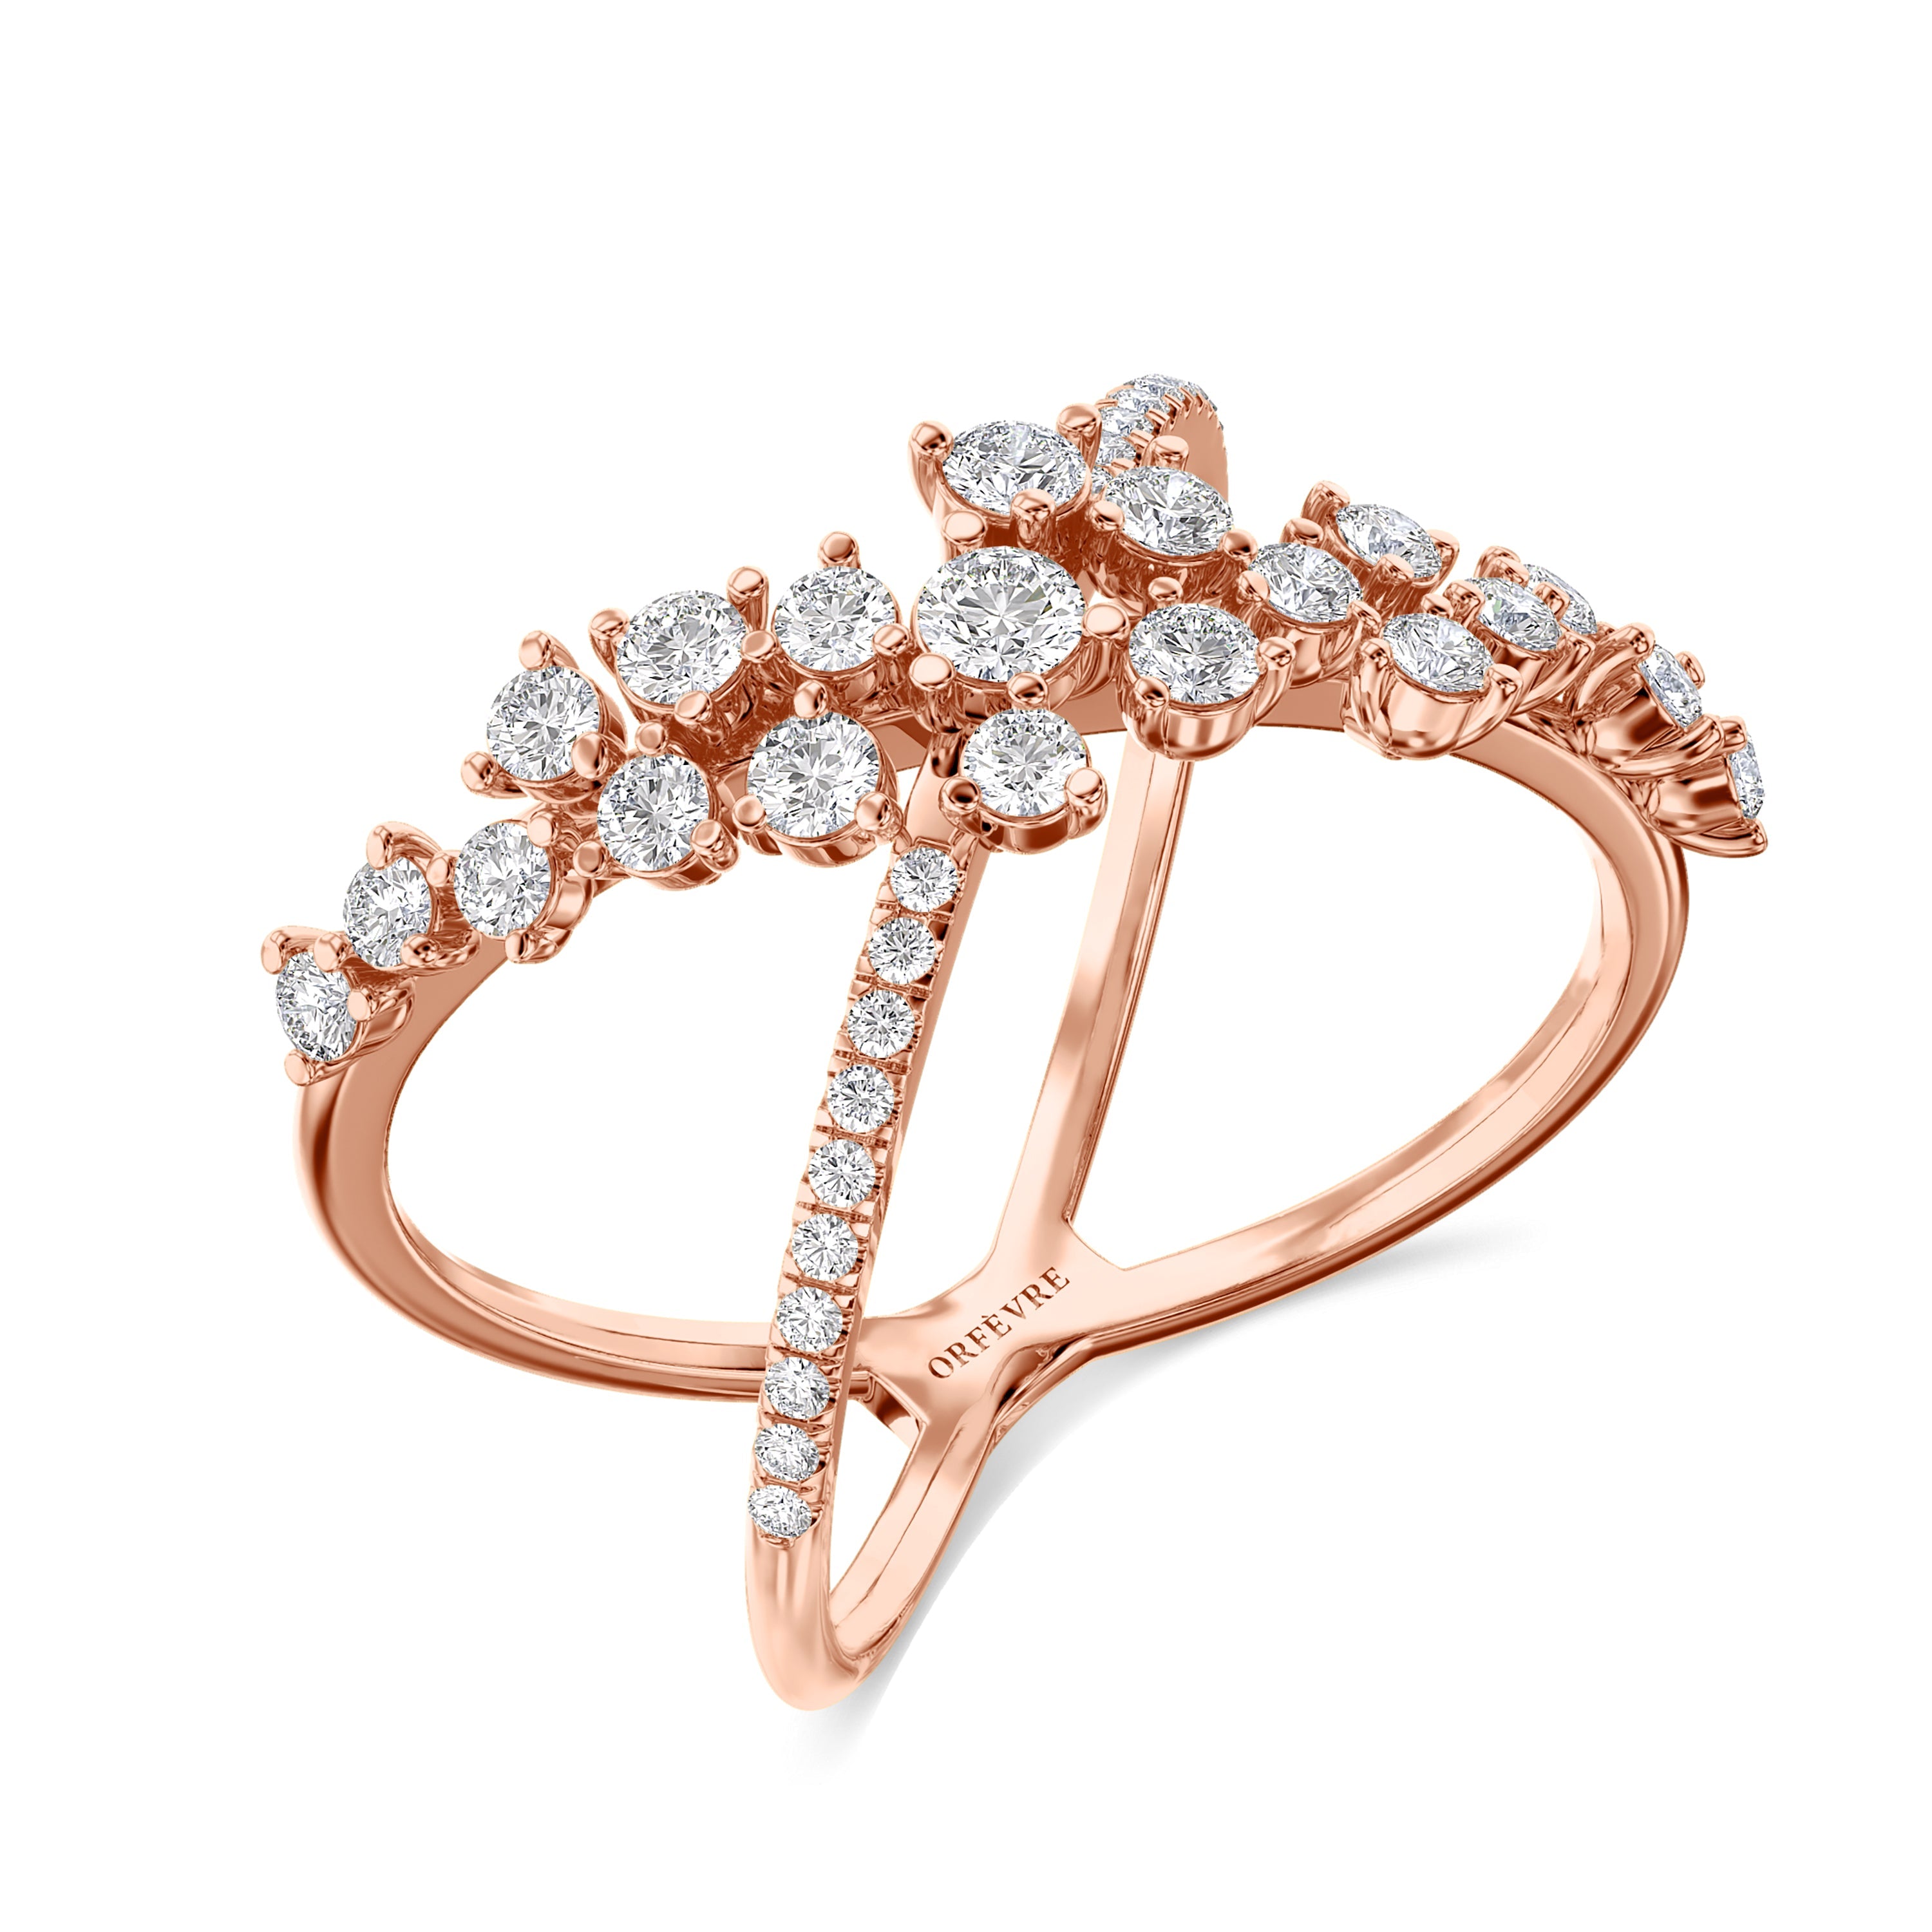 18K rose gold criss cross ring in 0.70 carats, FG color and SI clarity